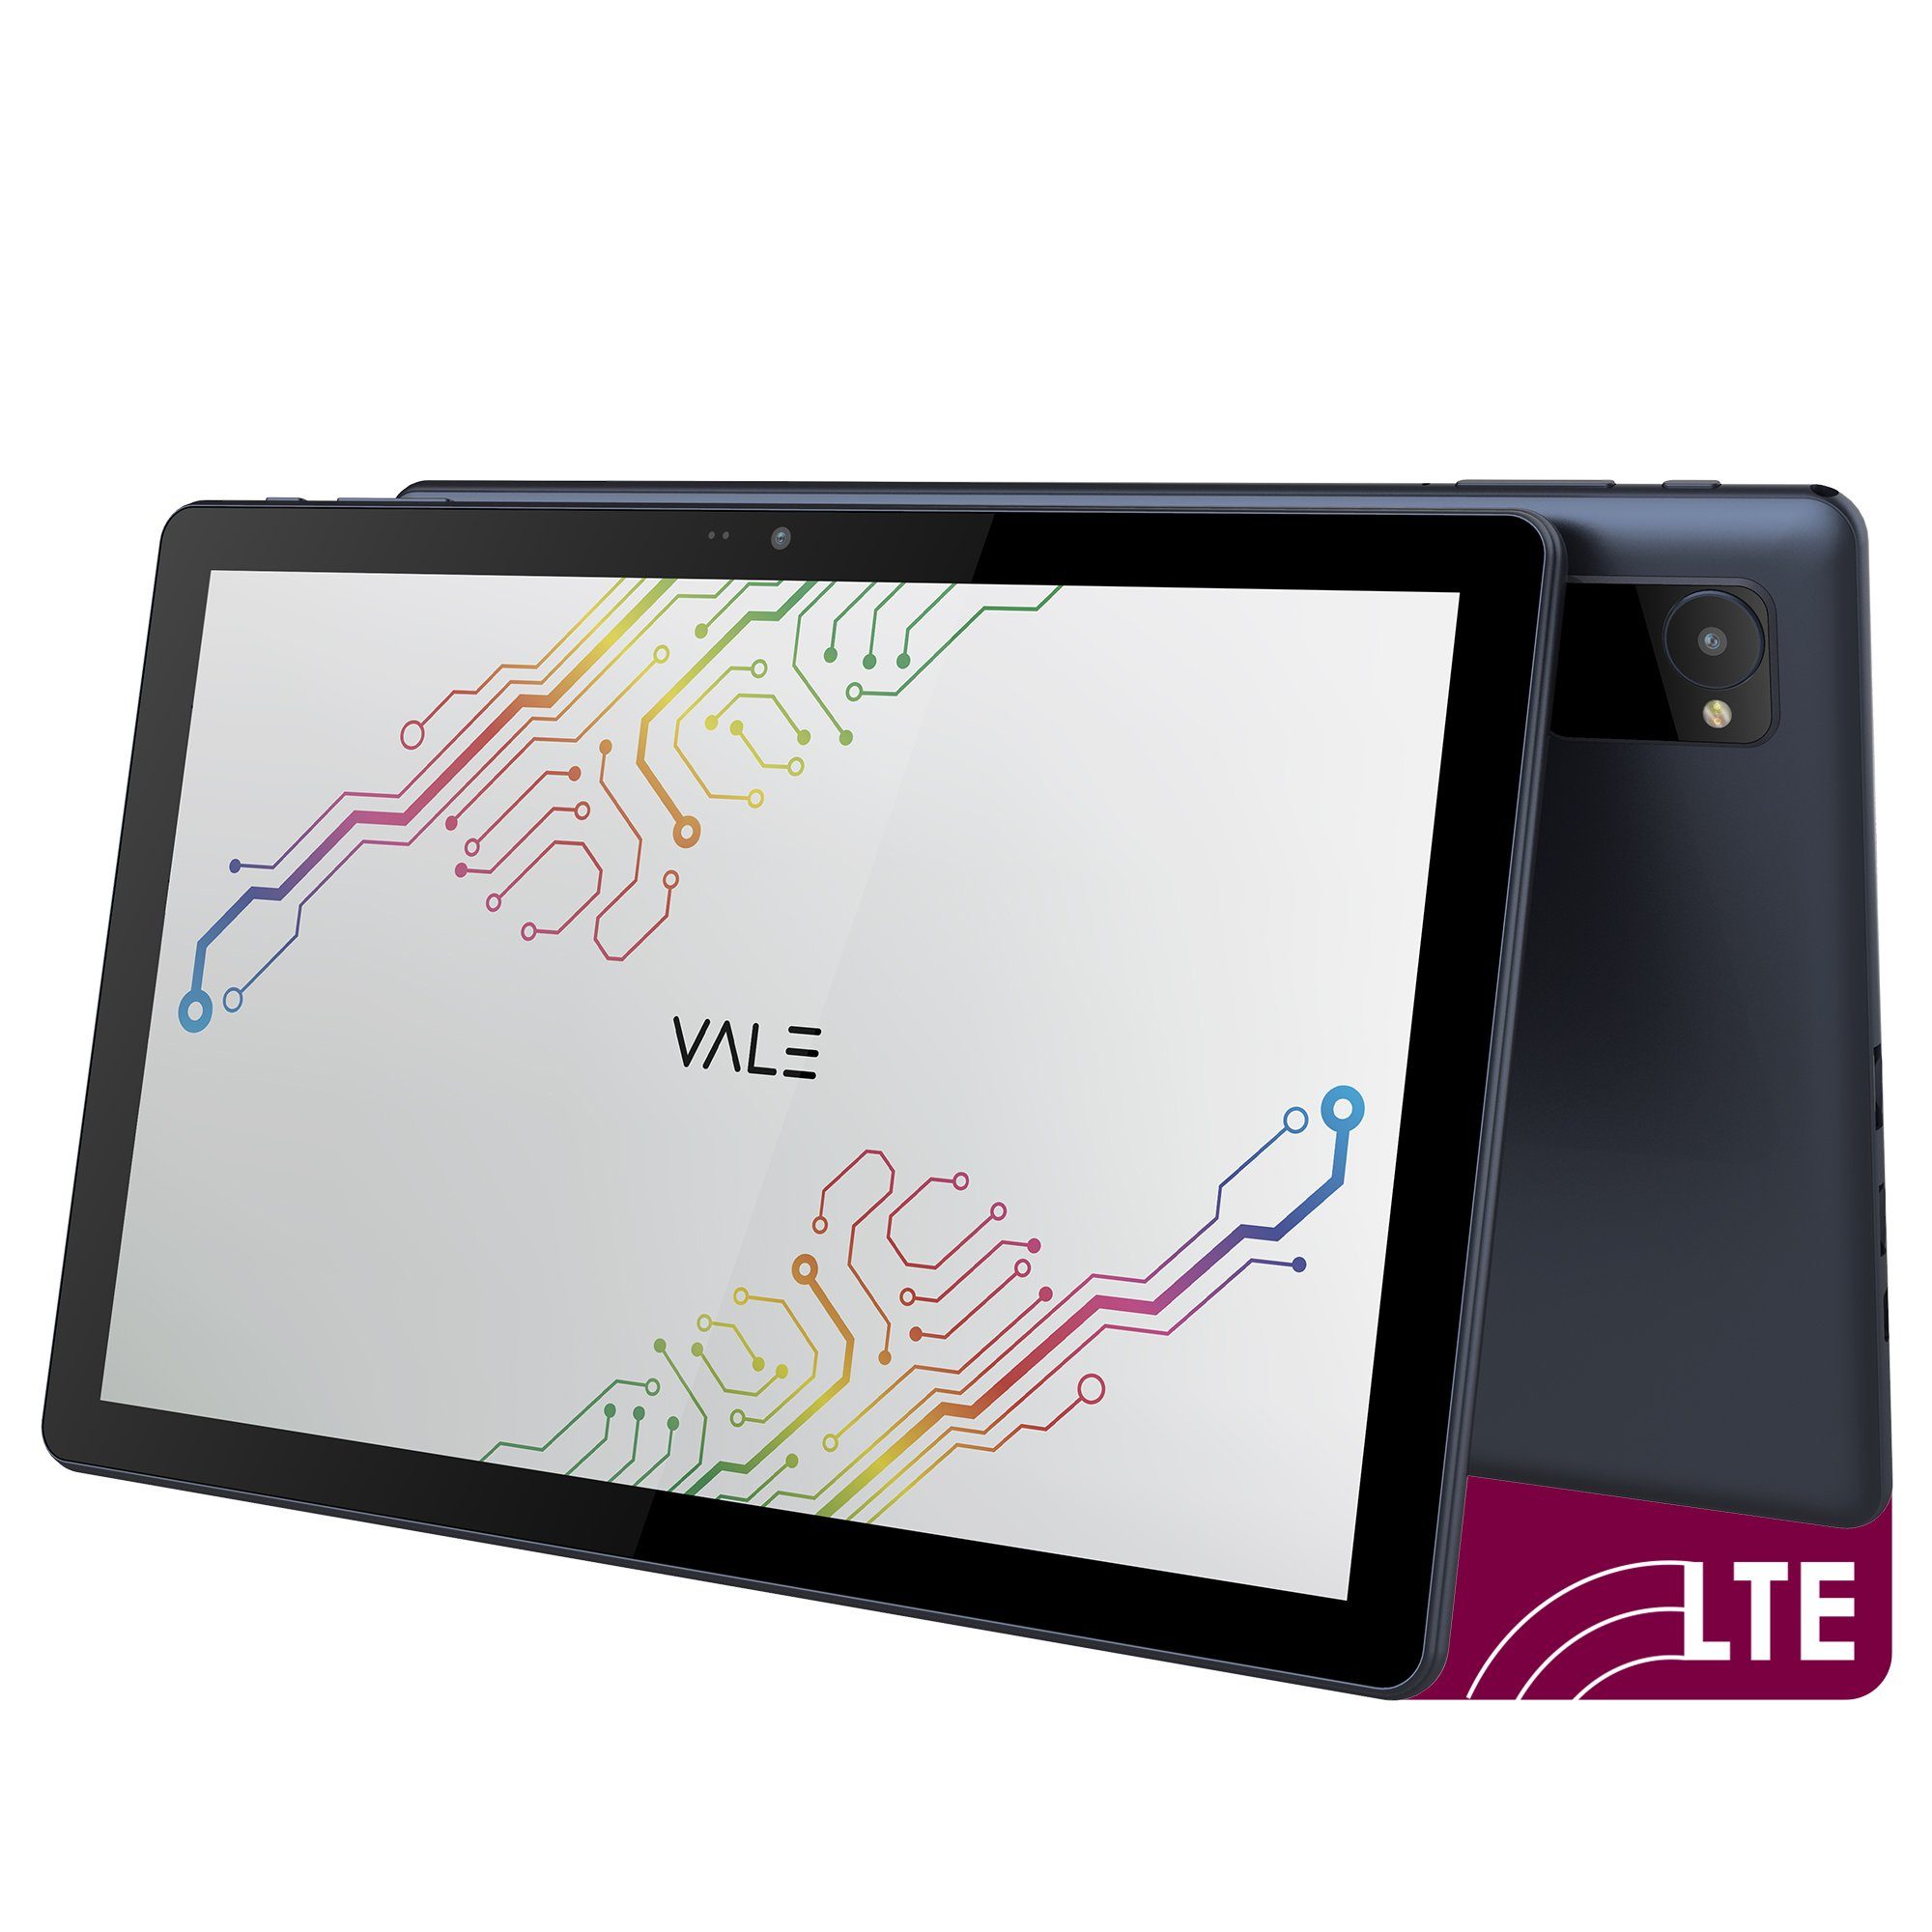 VALE V10E-LTE-464 Tablet mit LTE Tablet (10", 64 GB, Android 13, LTE)